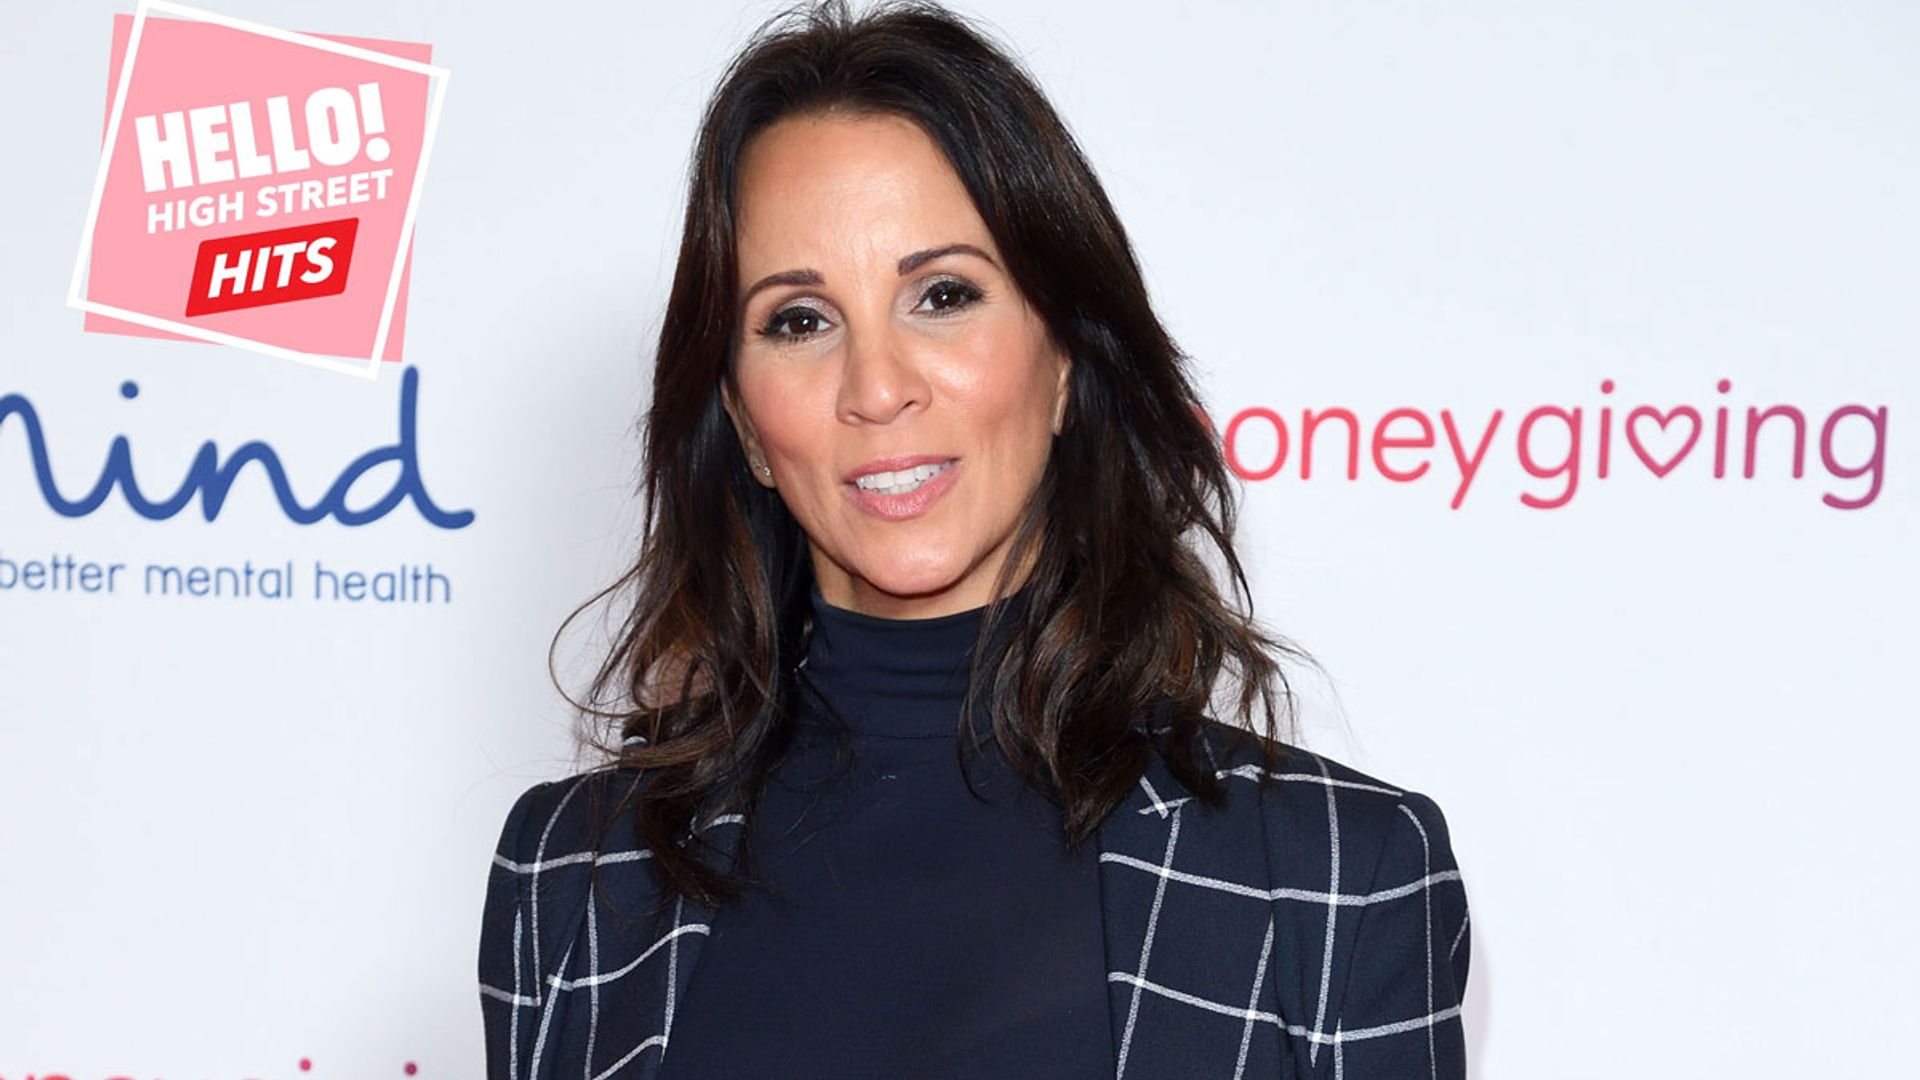 andrea-mclean-hsh